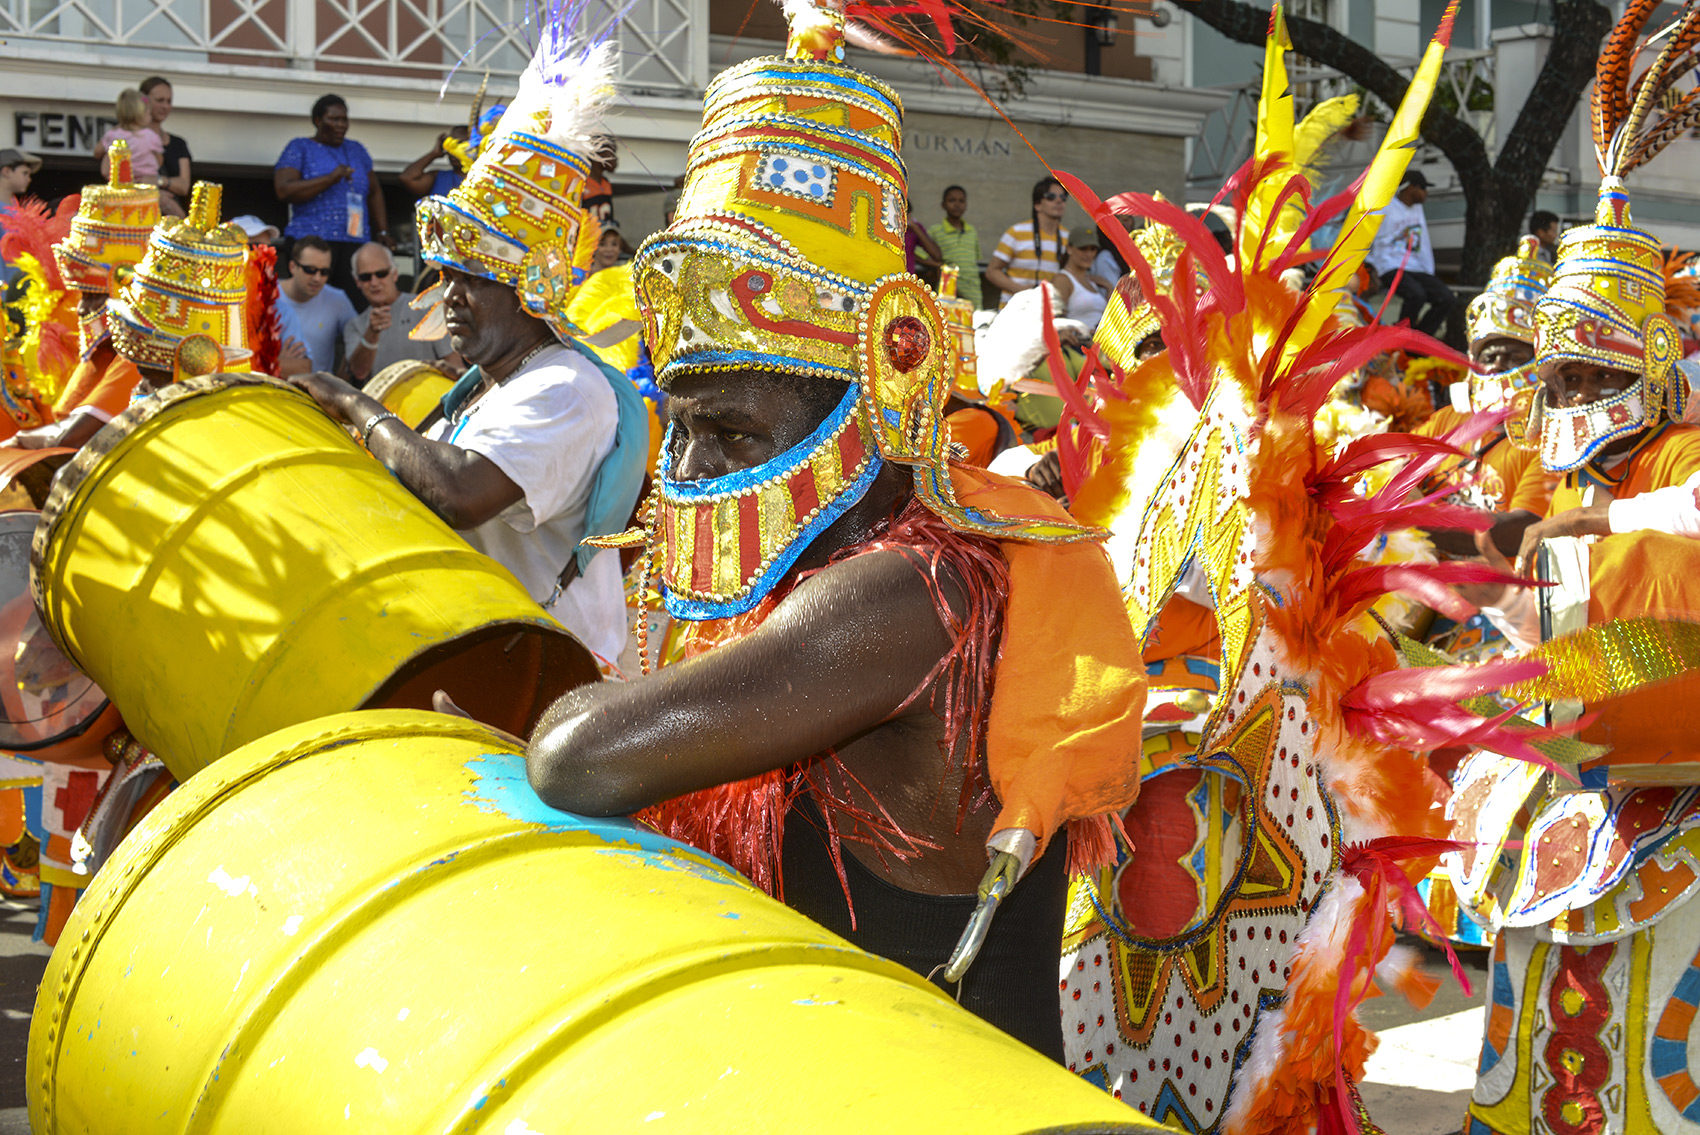 What You Need To Know About Visiting The Bahamas During Junkanoo